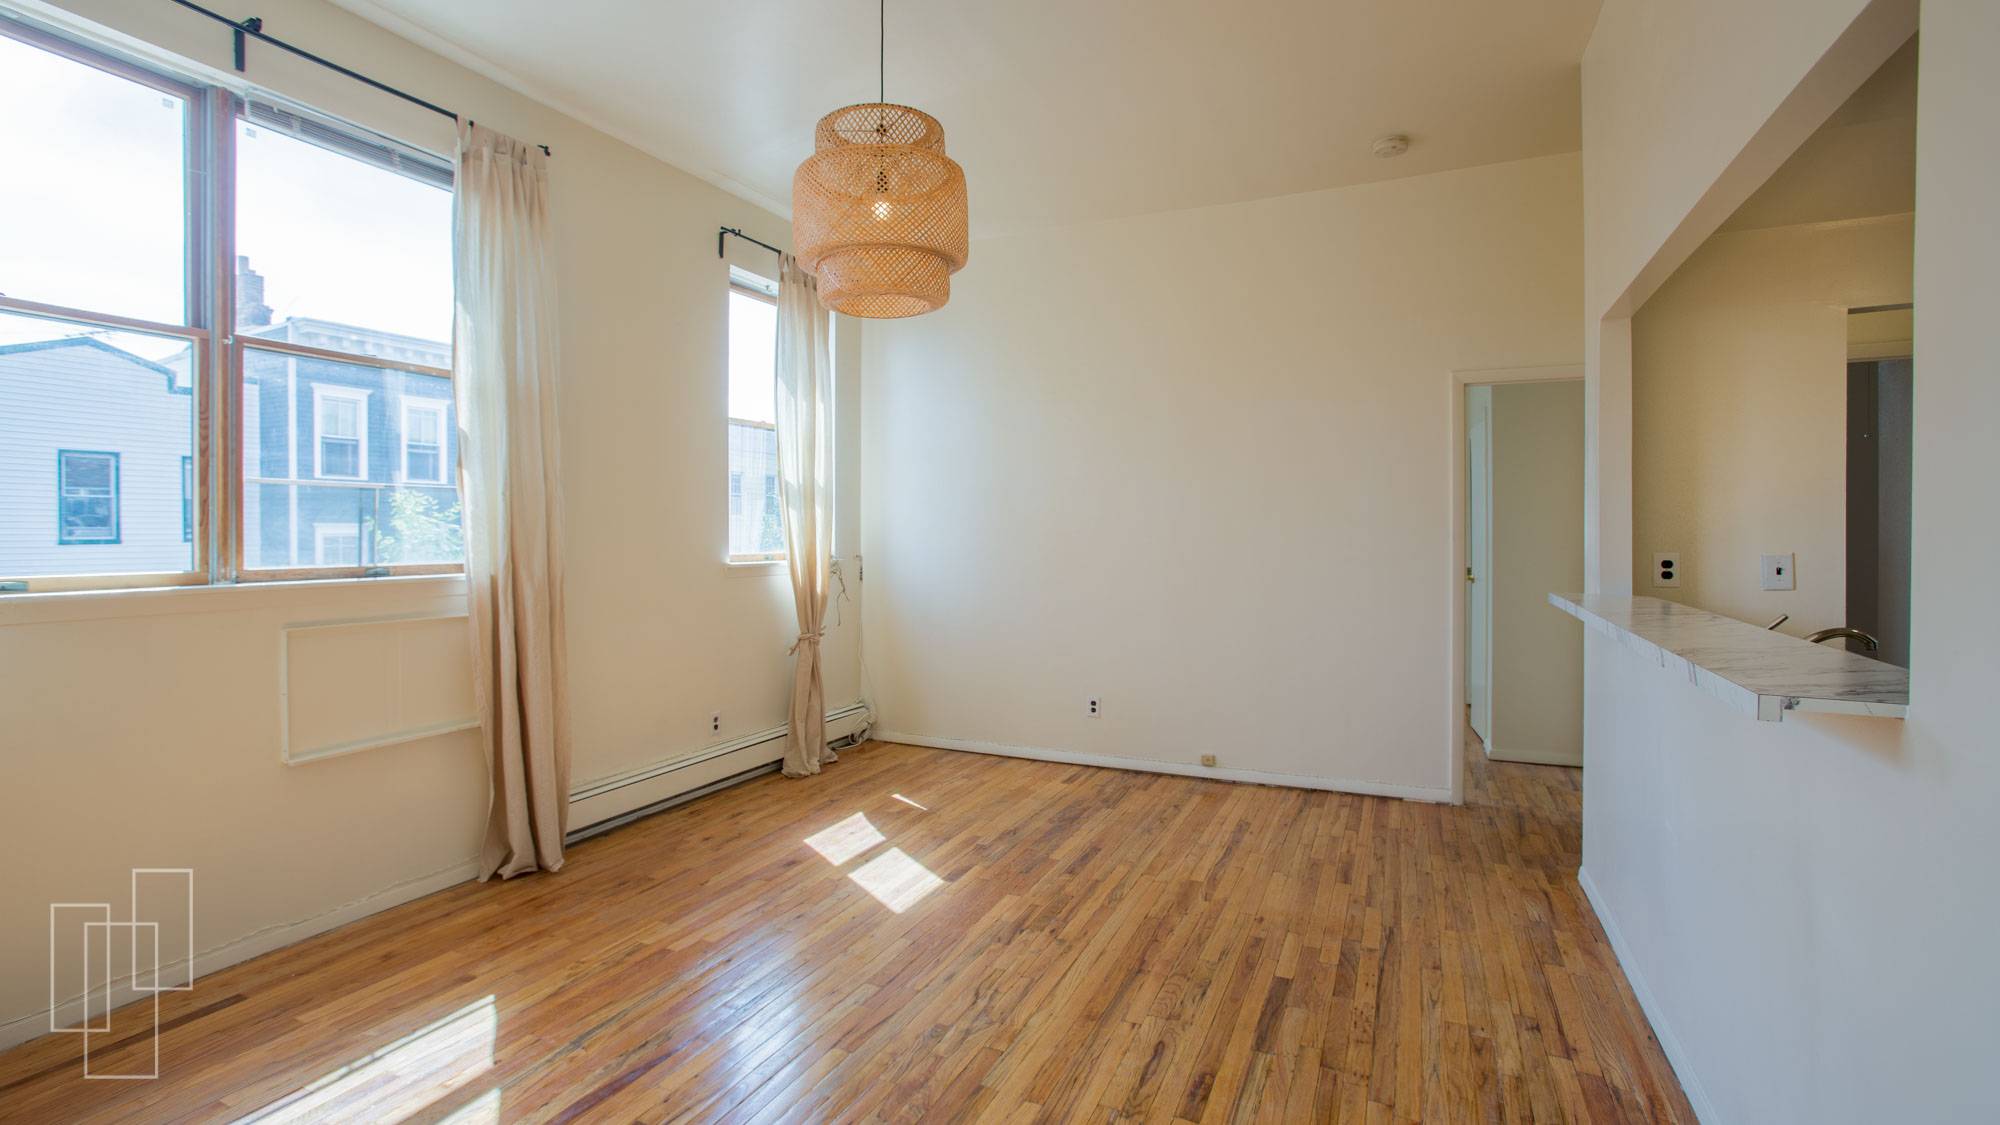 This remarkably quiet 2BR apartment boasts 12 foot ceilings and is flooded with natural light.